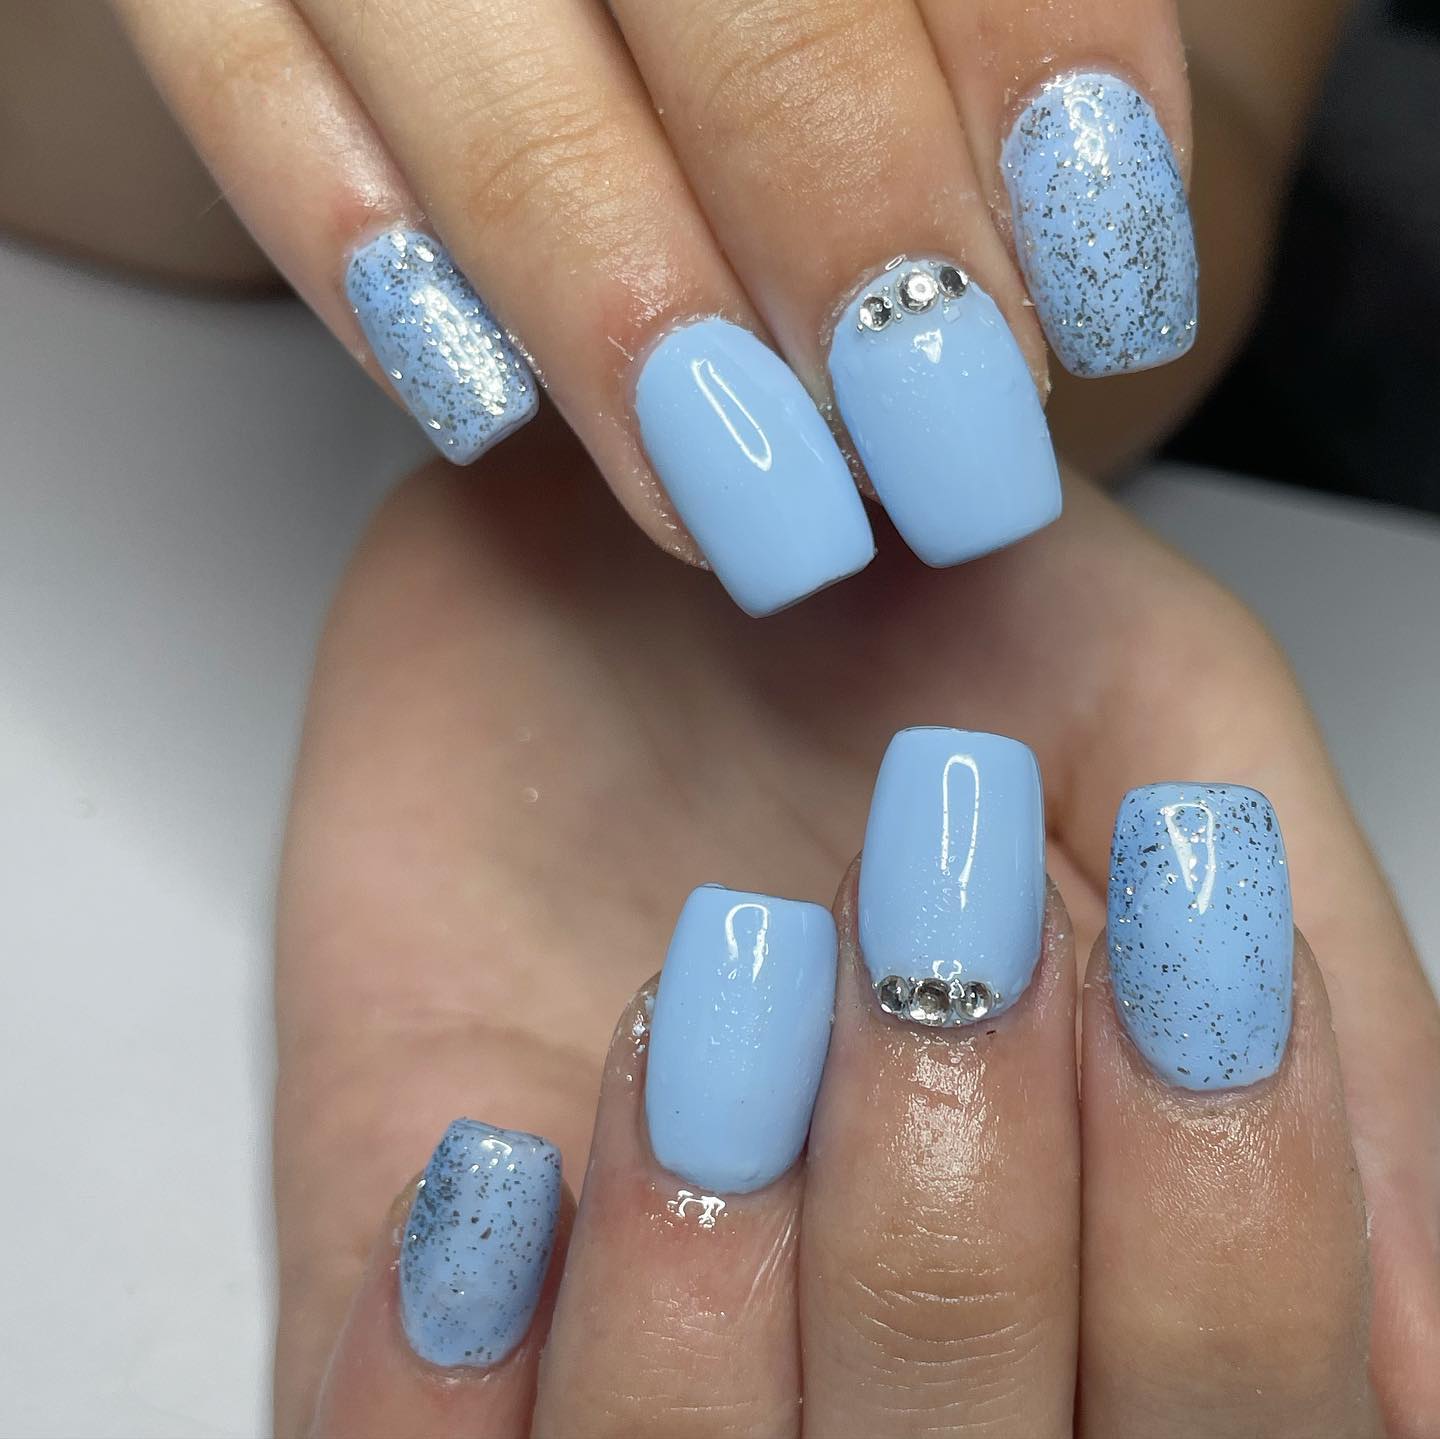 The women who like to shine should definitely try this nail design above. All you need is some glitters and shiny stones.